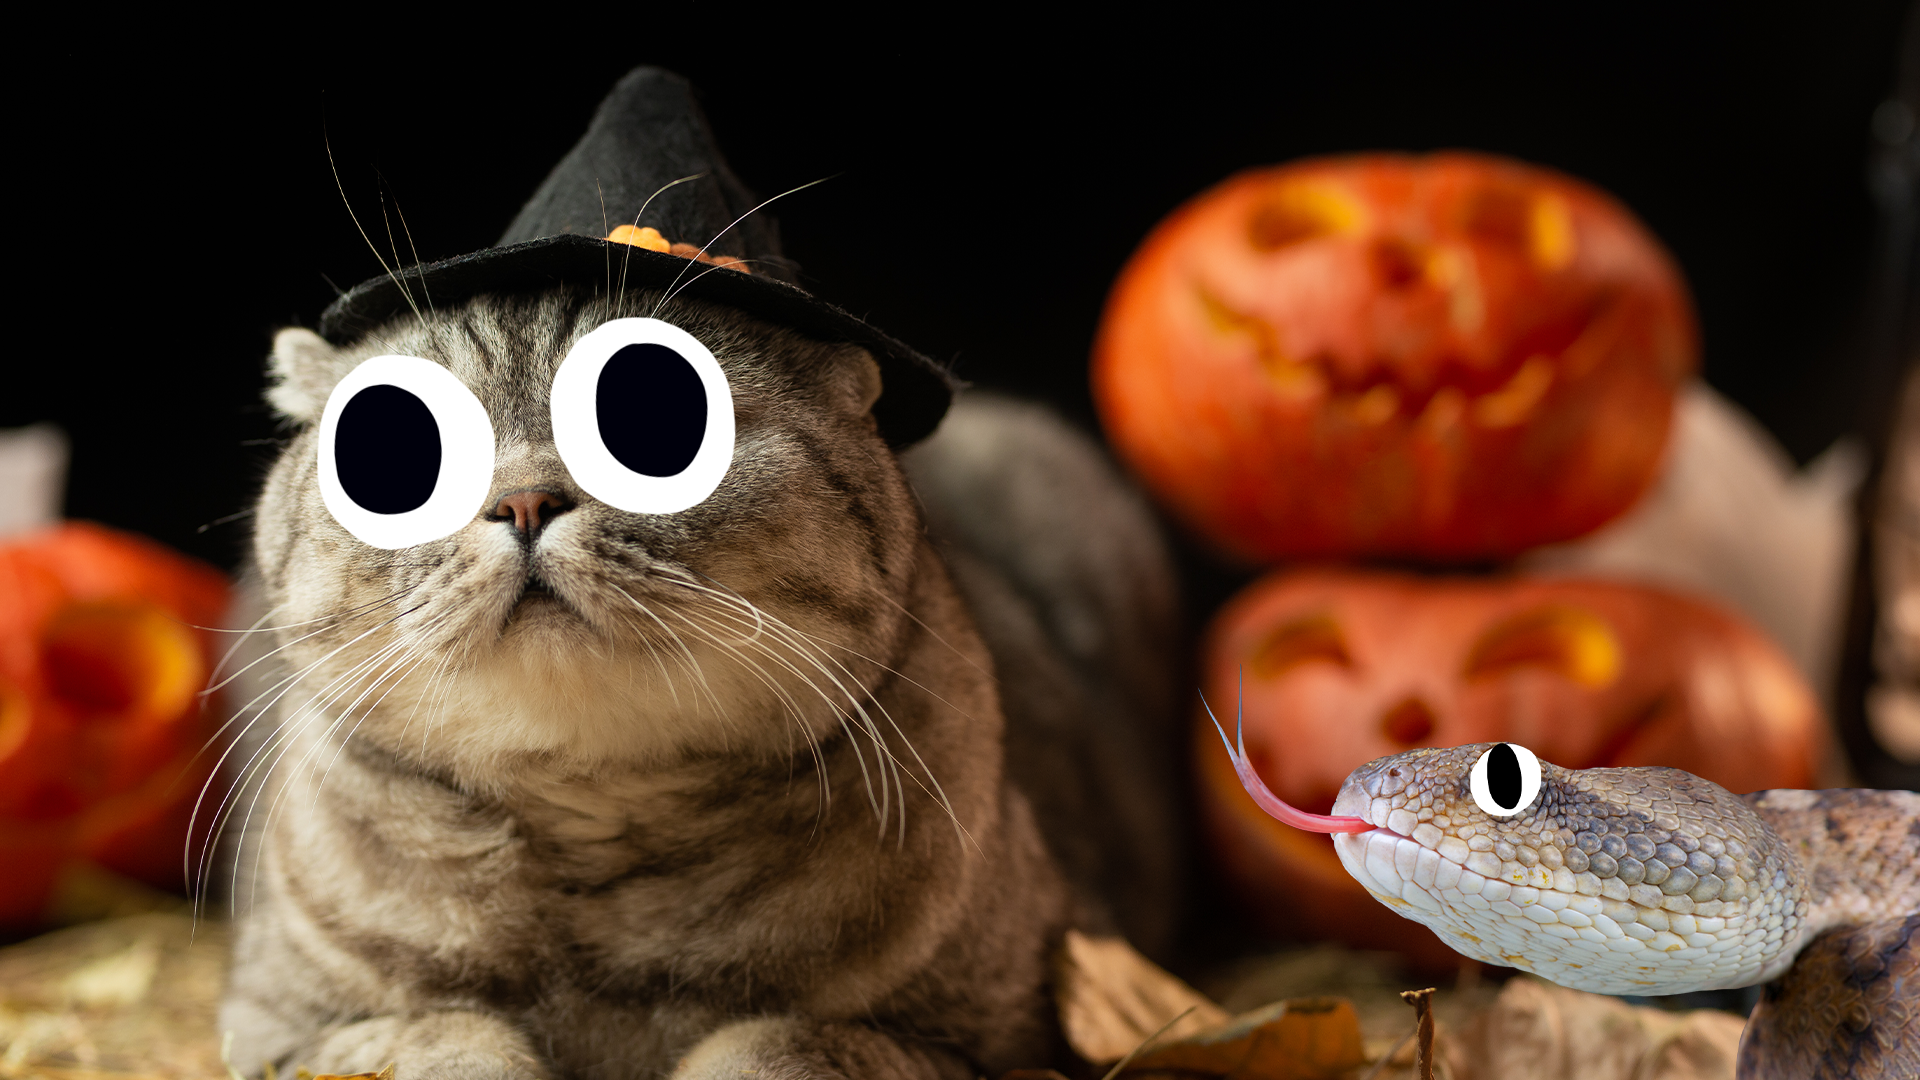 Cute spooky cat and snake